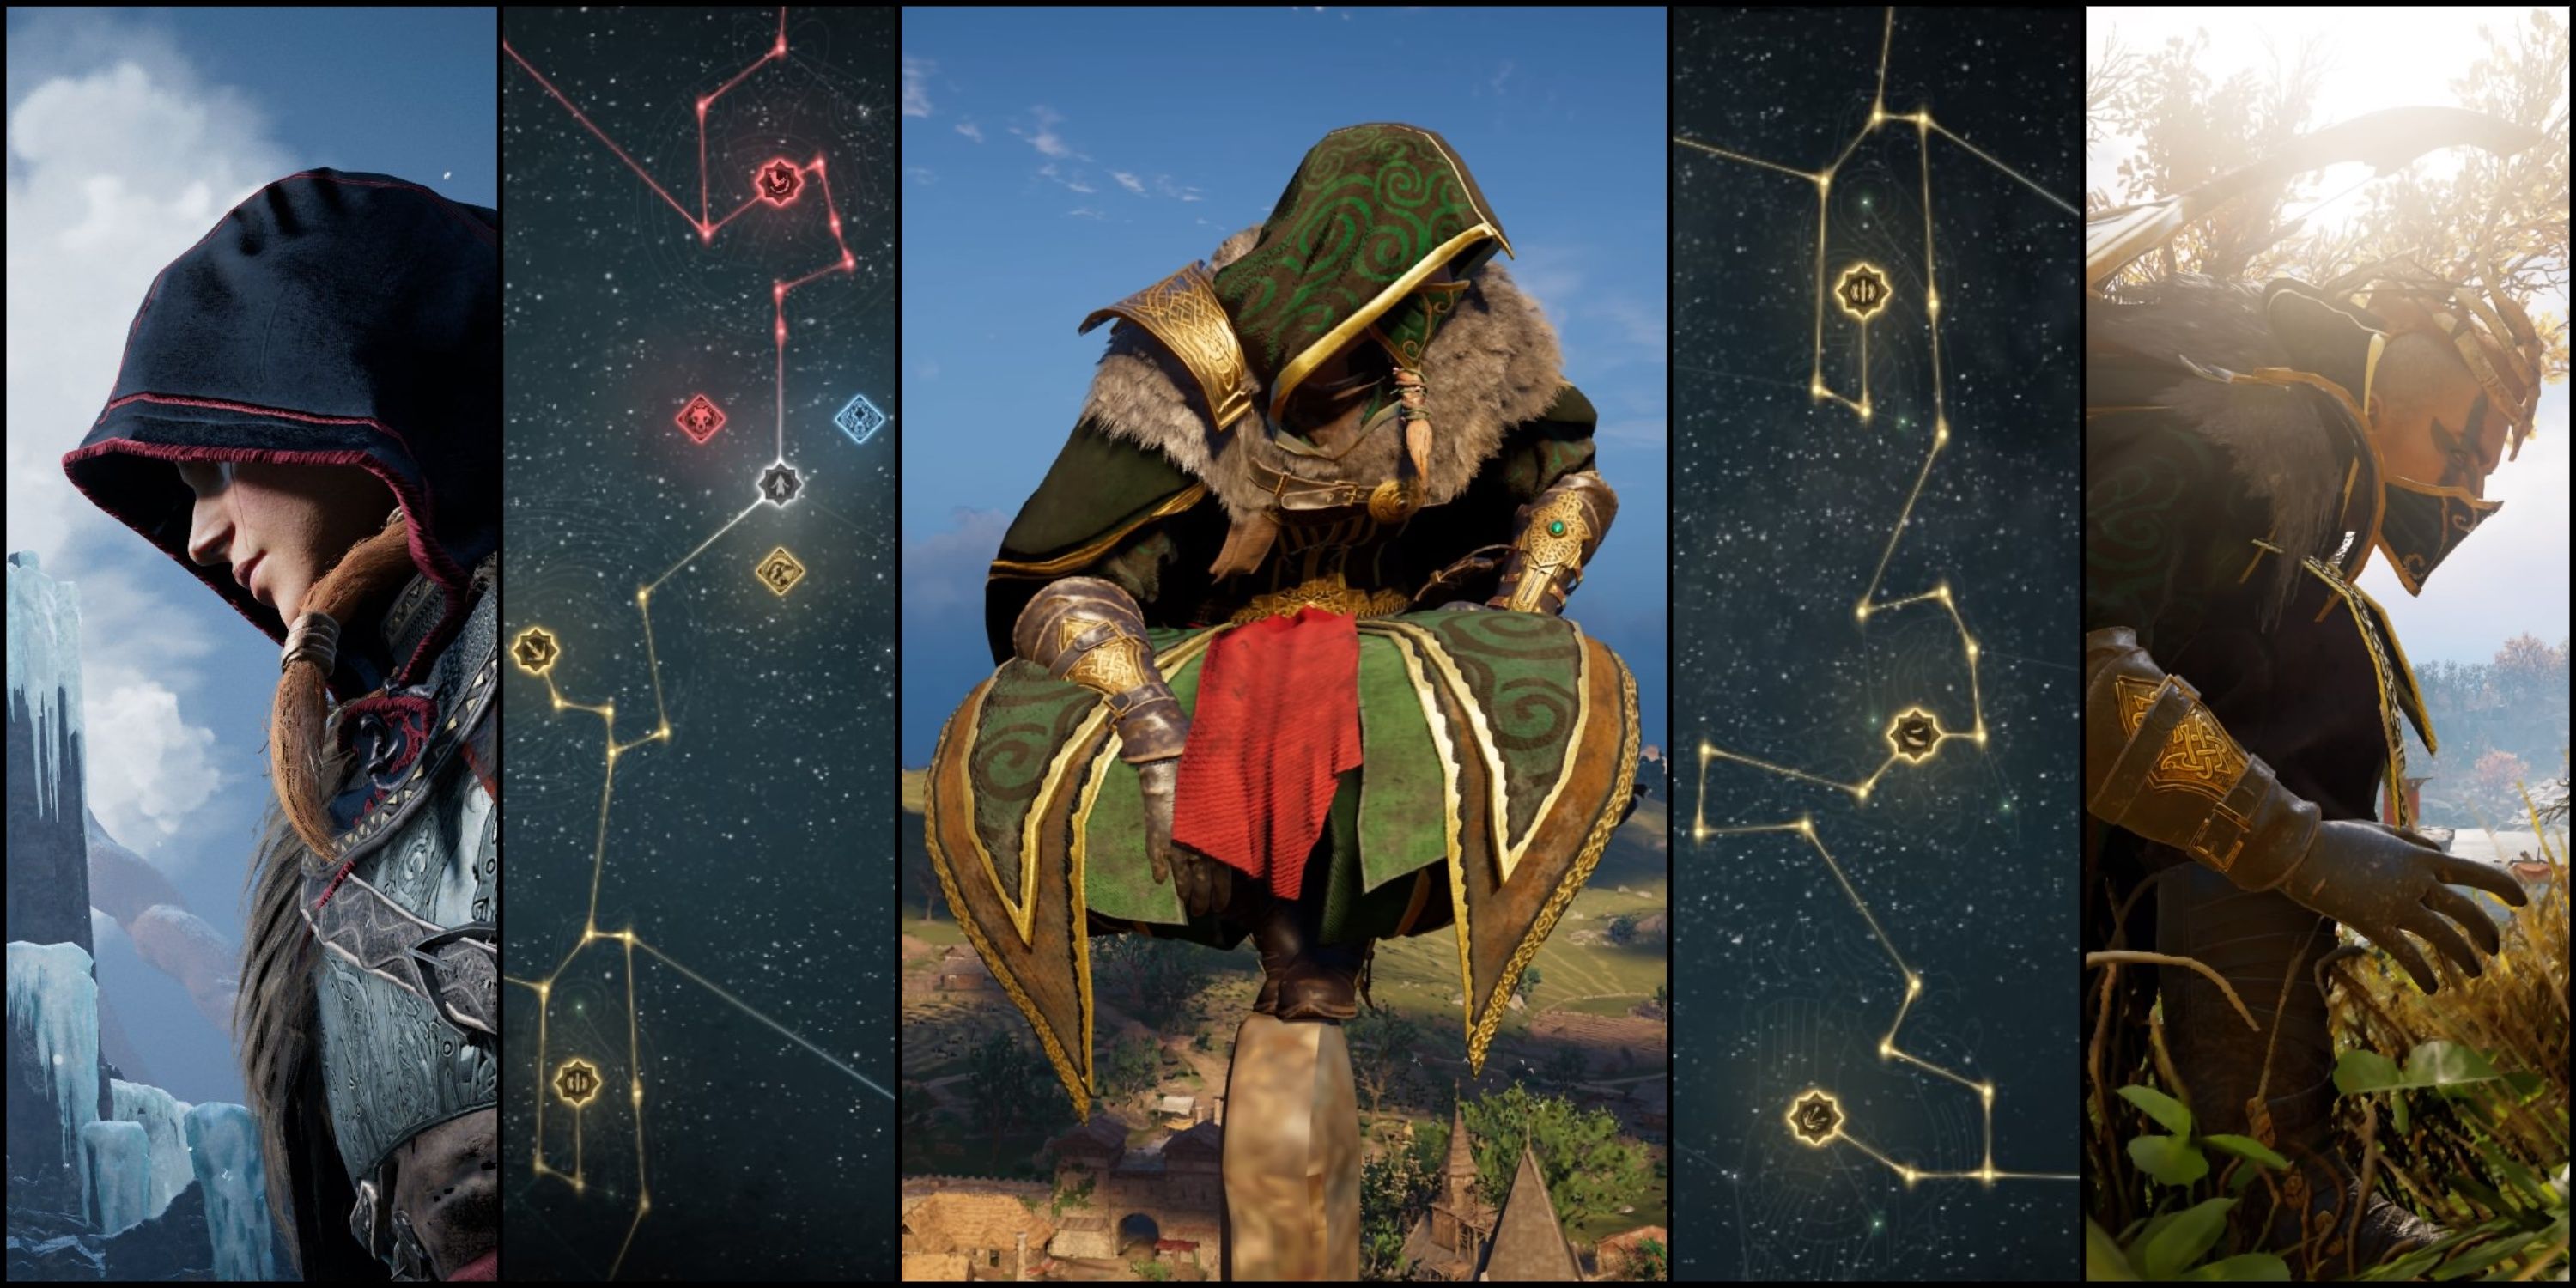 Assassin's Creed Valhalla Eivor in Raven gear and skill tree